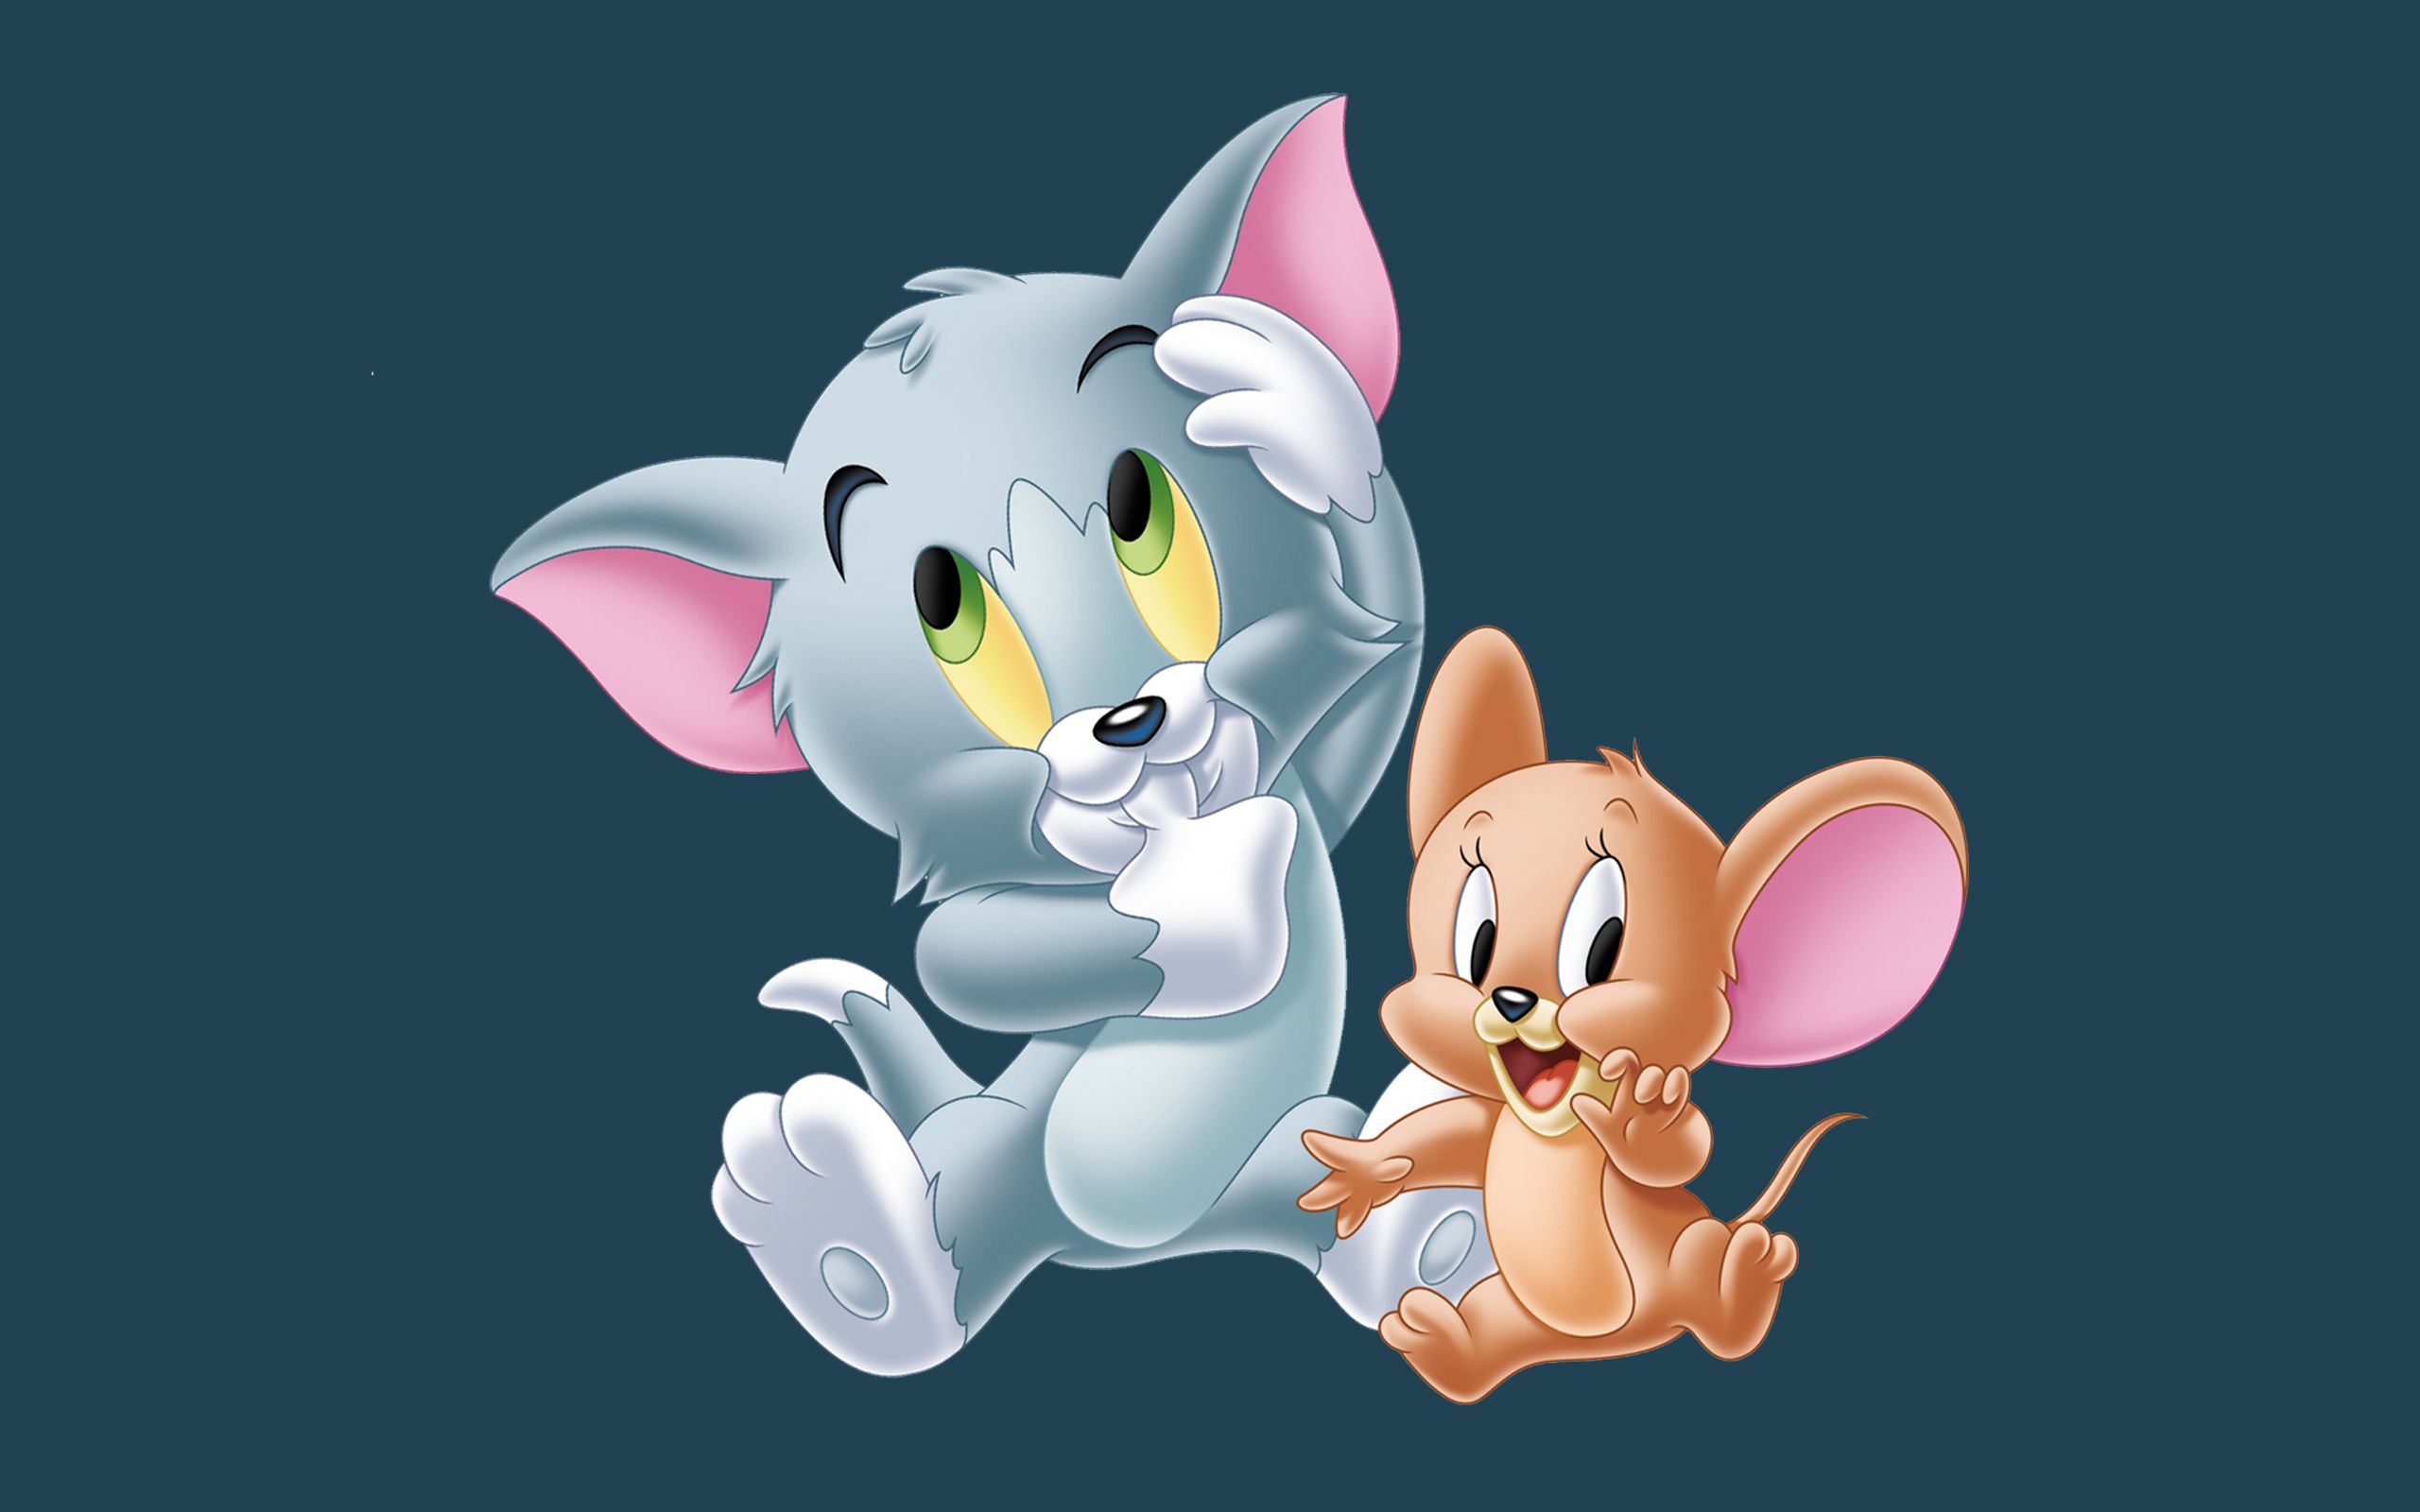 Tom and Jerry Wallpapers on WallpaperDog